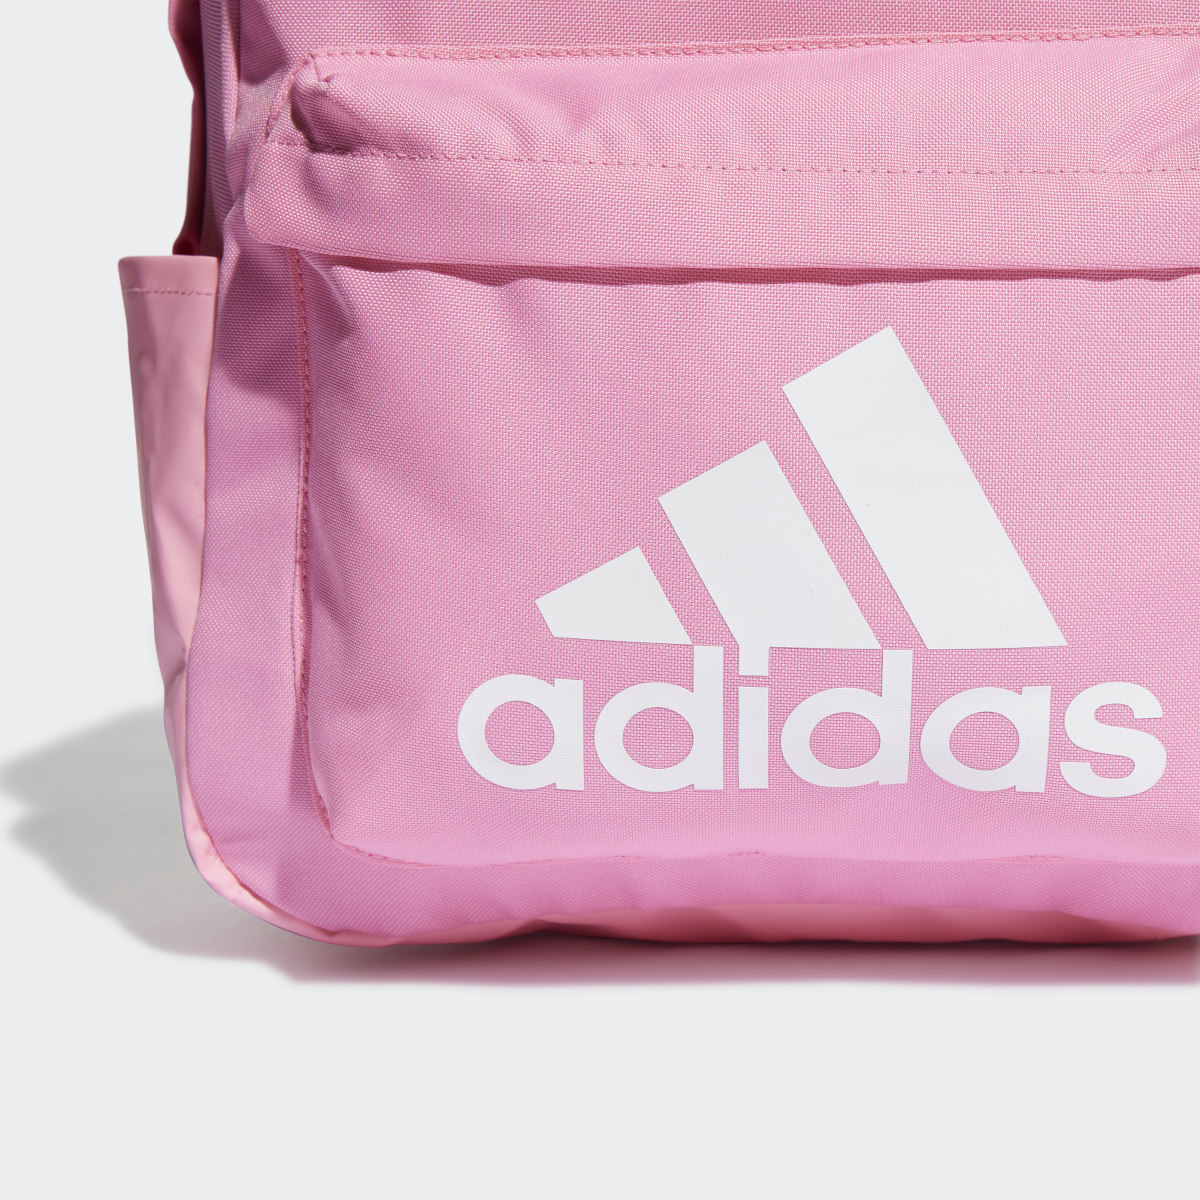 Adidas Classic Badge of Sport Backpack. 6